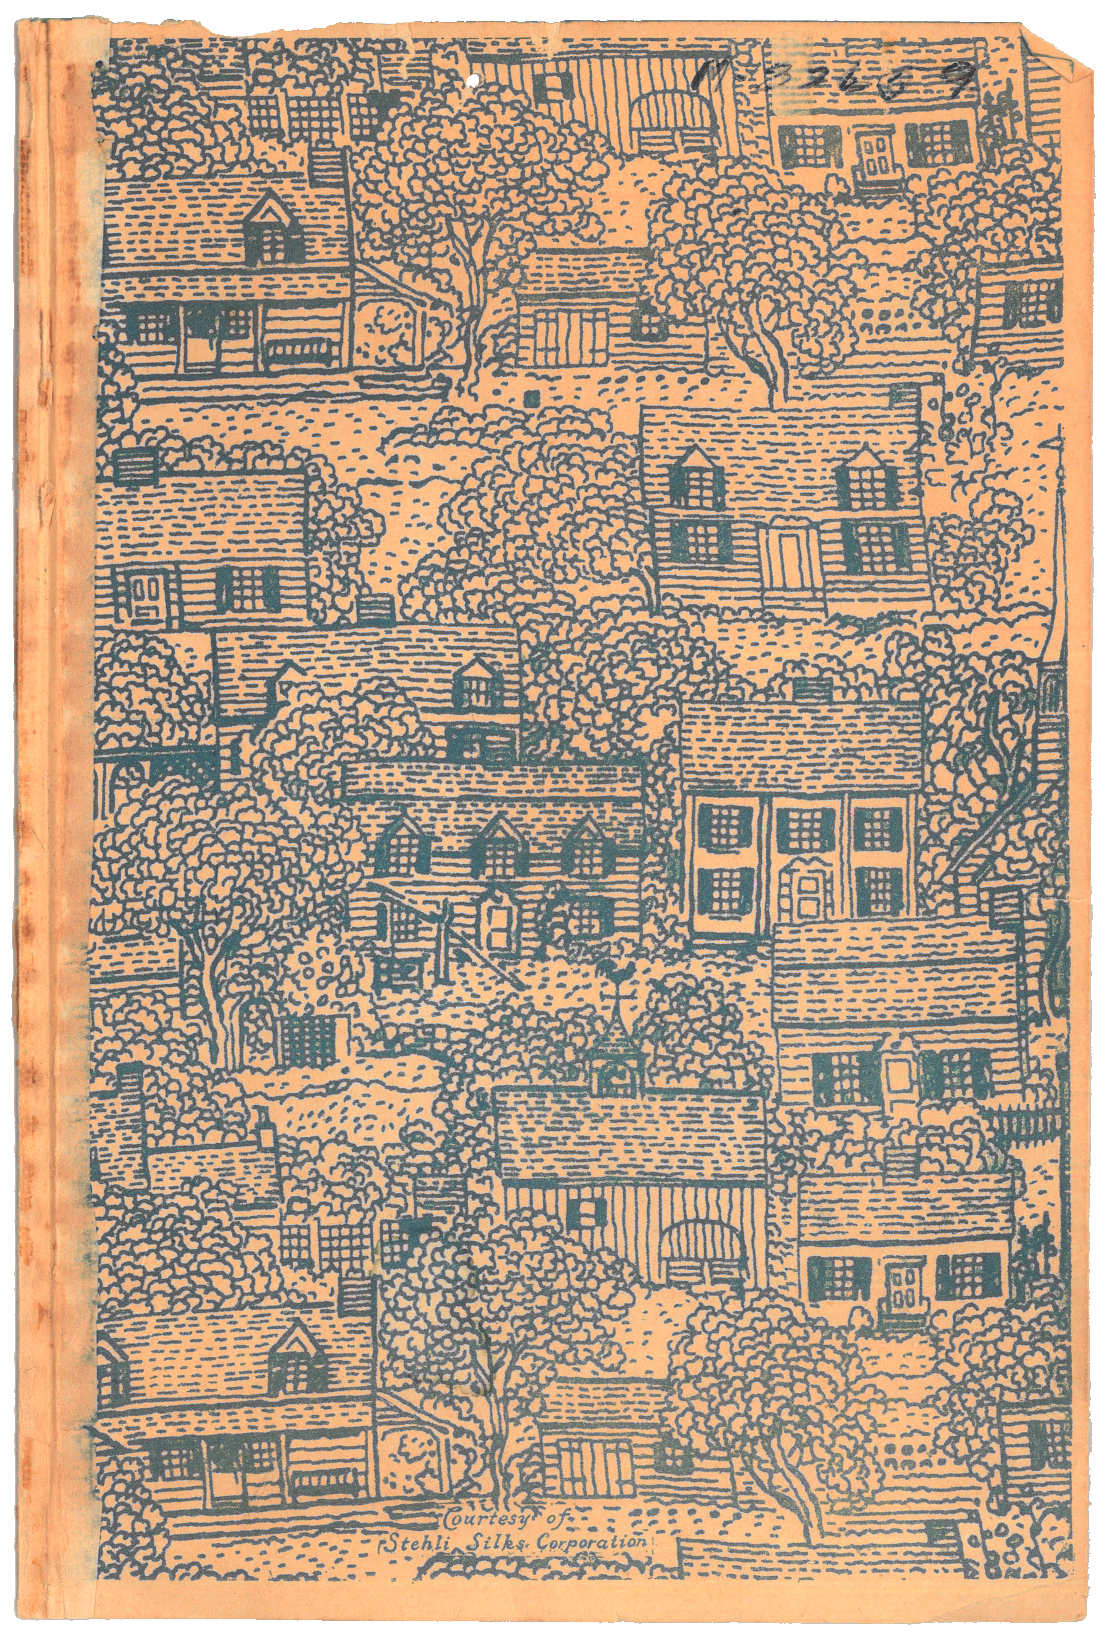 a paper with a line design of overlapping houses and trees. it's
      charming, in blue on a background yellowed with age. there's a few
      handwritten numbers in one corner, although they are not very legible.
      it's an endpaper, torn out of an old book a long time ago.